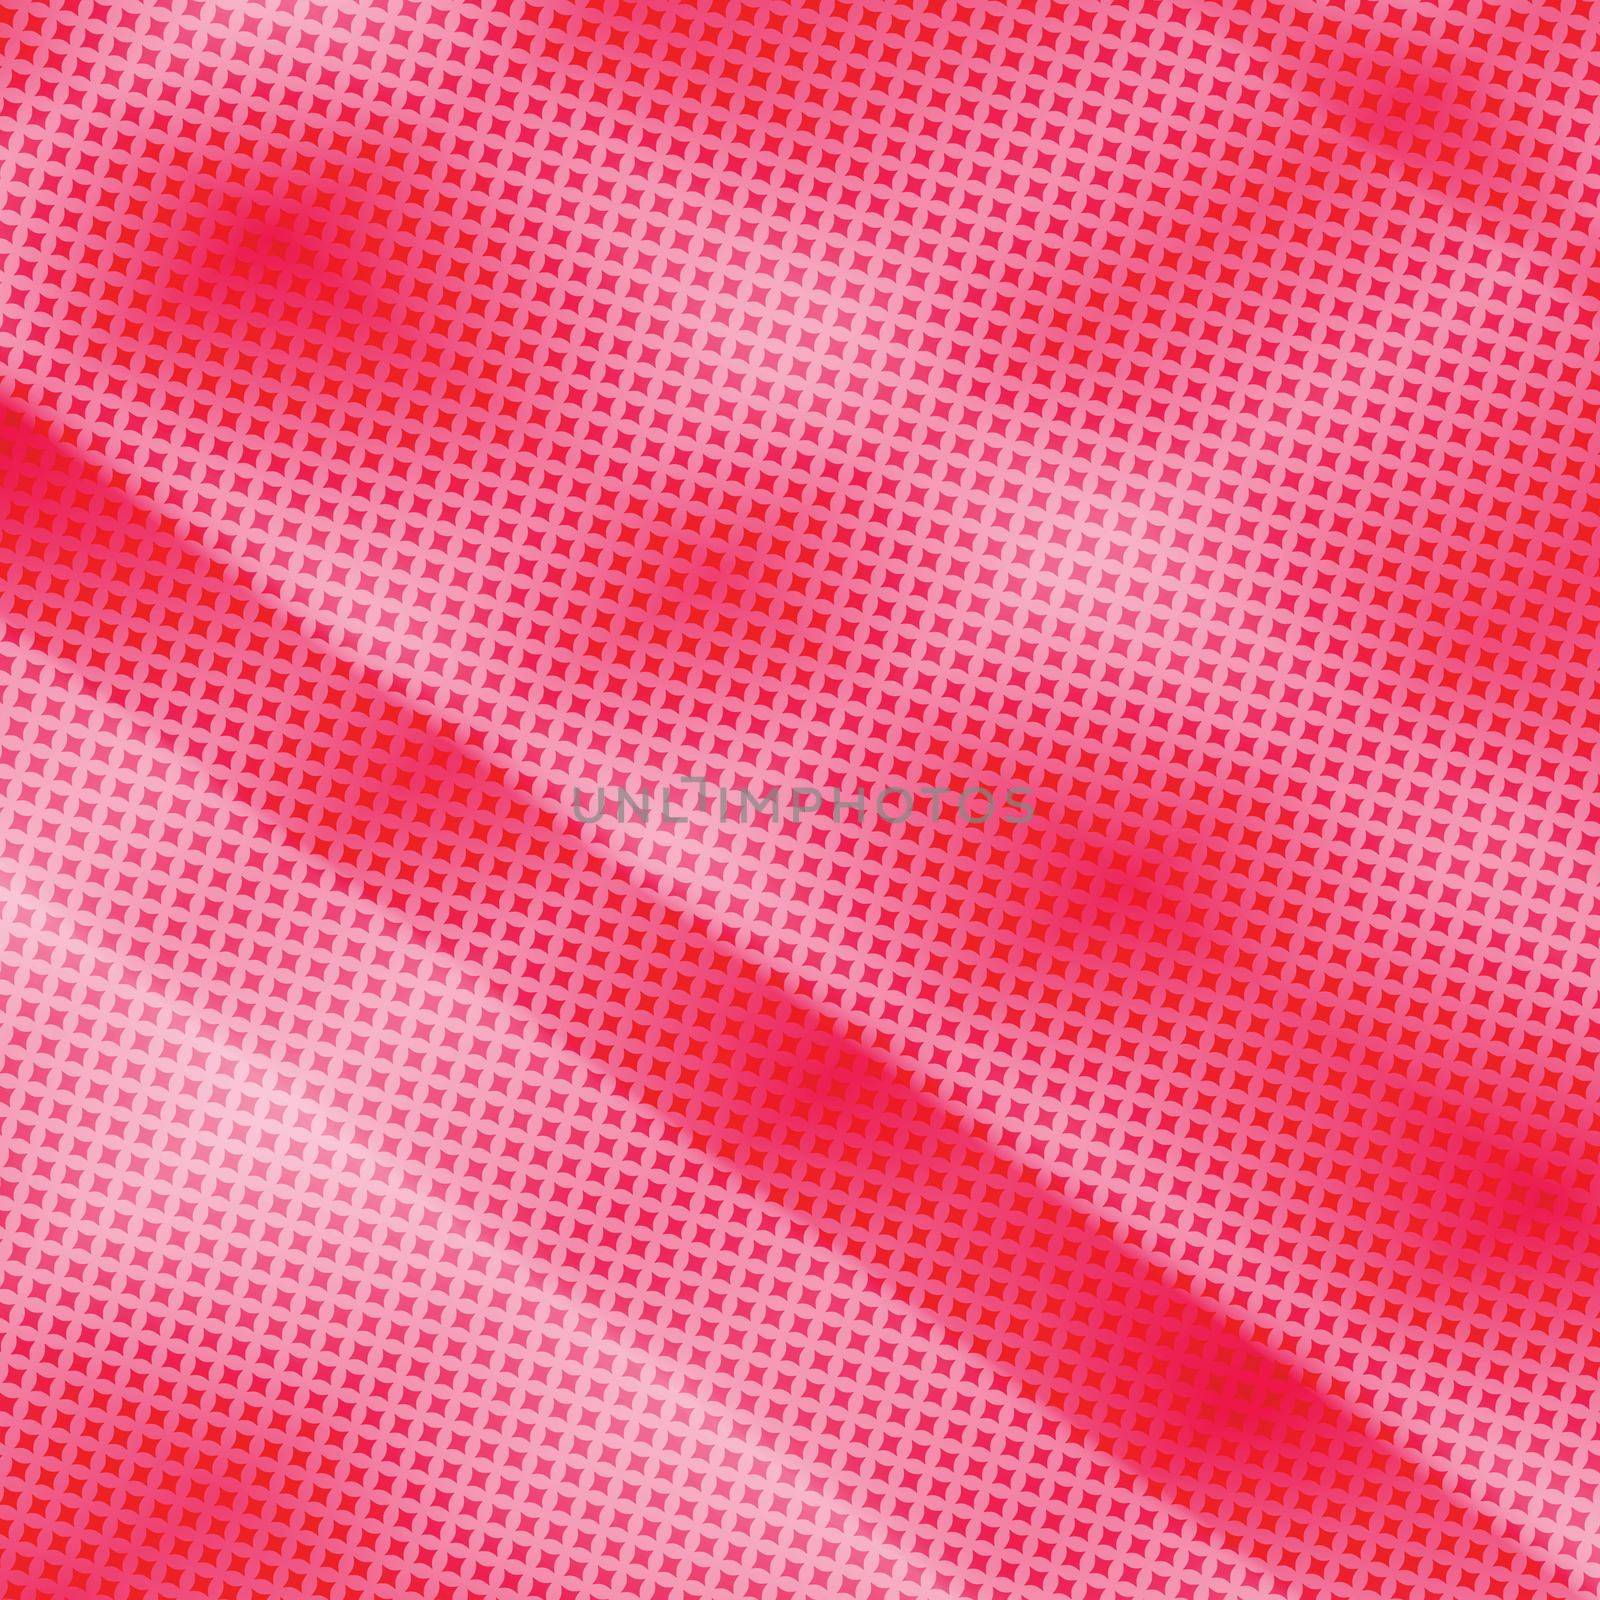 90-s style. Creative illustration in halftone style with pink gradient. Abstract colorful geometric background. Pattern for wallpaper, web page, textures by allaku